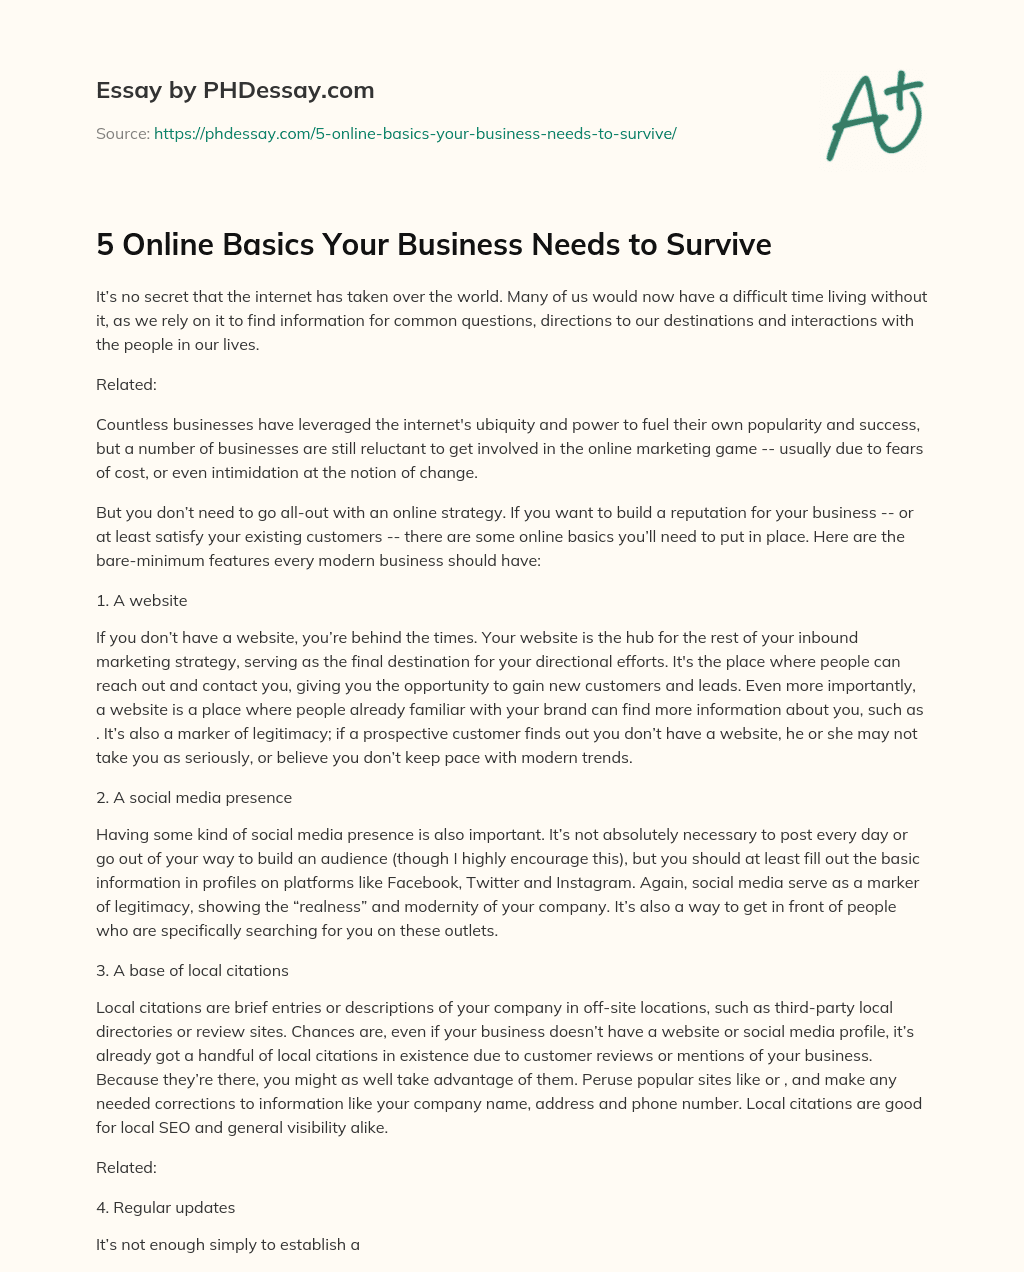 5 Online Basics Your Business Needs to Survive essay